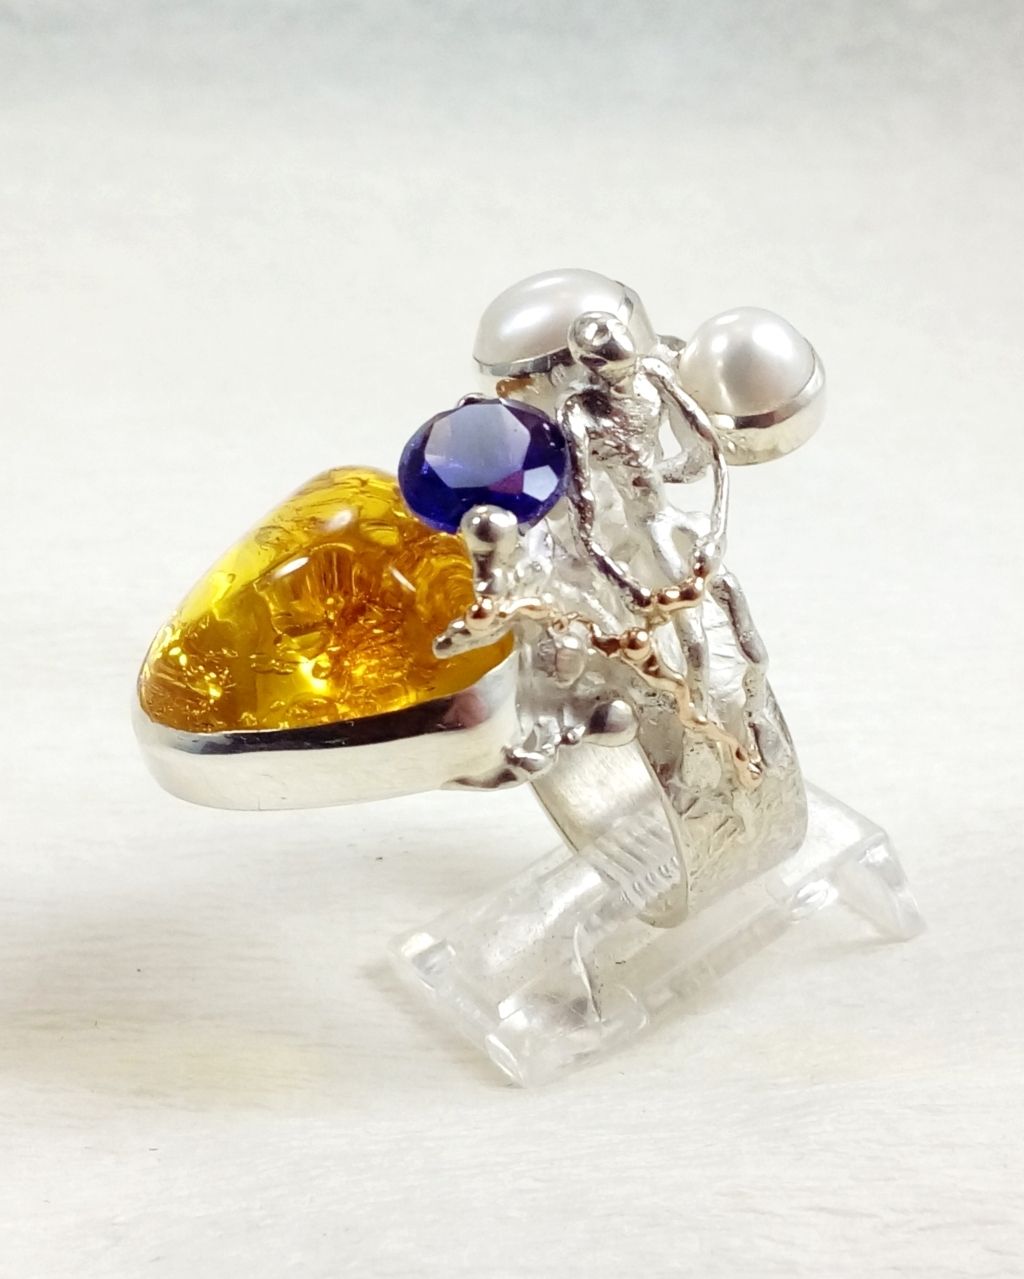 Gregory Pyra Piro ring 3045, Gregory Pyra Piro art jewellery, art nouveau inspired art, one of a kind jewellery with amethyst and amber, handcrafted jewellery with gemstones and pearls, who still makes one of a kind jewelry, jewellery sold in art galleries, jewellery sold in craft galleries, mixed metal jewellery with gemstones and pearls, artists during lockdown, where do I find still active vintage jewelry artists, how do I find vinatage designers and artists that are still active, where tojewelry with retro style for my grandmotherjewellery online, where to find vintage jewelry artist that is still active, where to find fine craft product styles from the 80s and 90s, buy fine craft online, rings made during lockdown